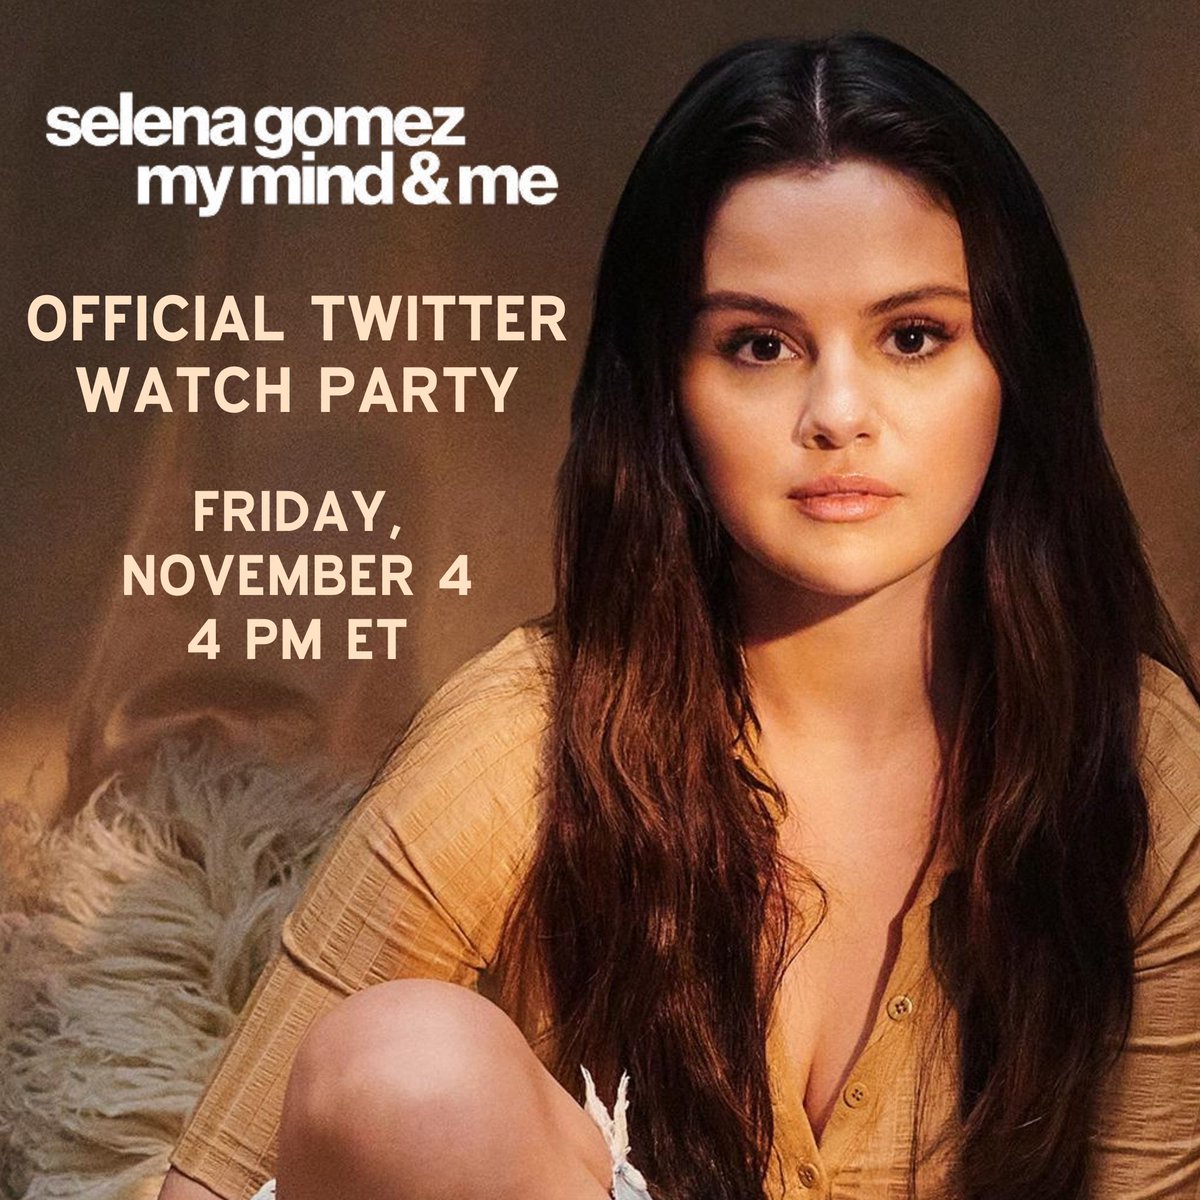 Her mind and US... join us tomorrow at 4pm EST for the official #MyMindAndMe watch party! If you don’t have @appletvplus already, no worries - use apple.co/selenagift to get a 2 month free trial. Don’t forgot to bring your tissues 🤧🤍